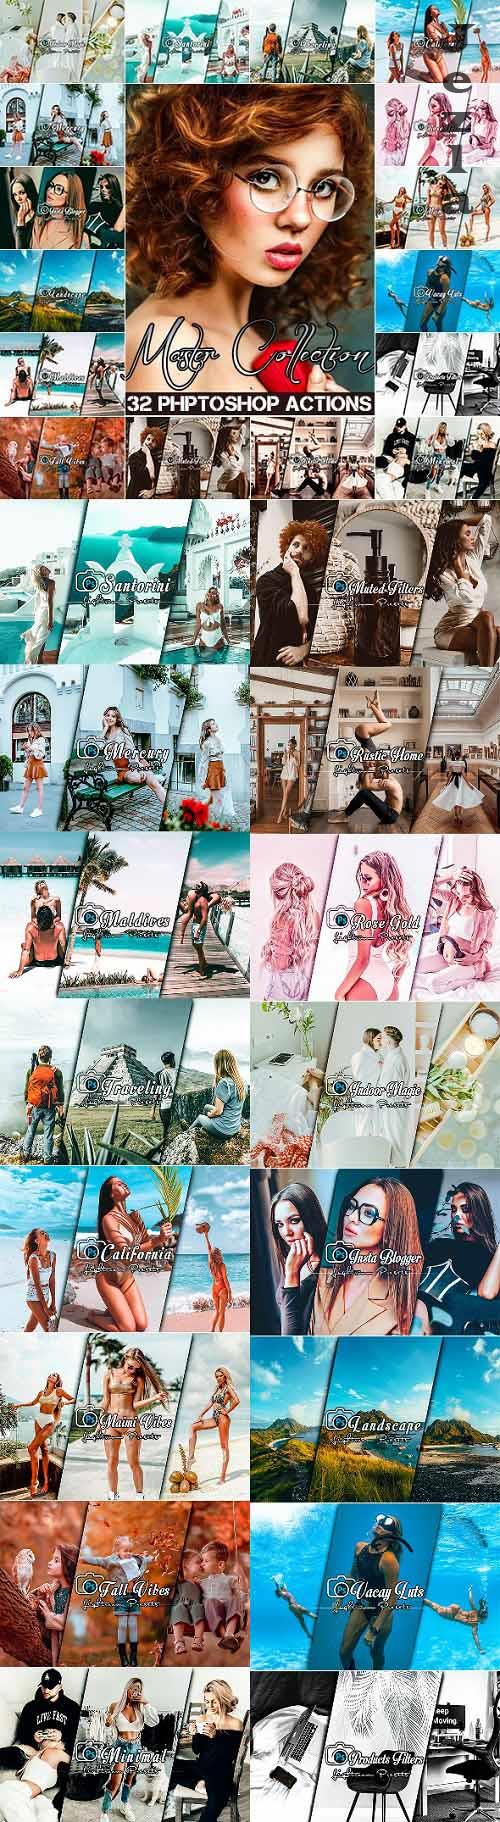 Master Collection 32 Photoshop Actions - 34071238